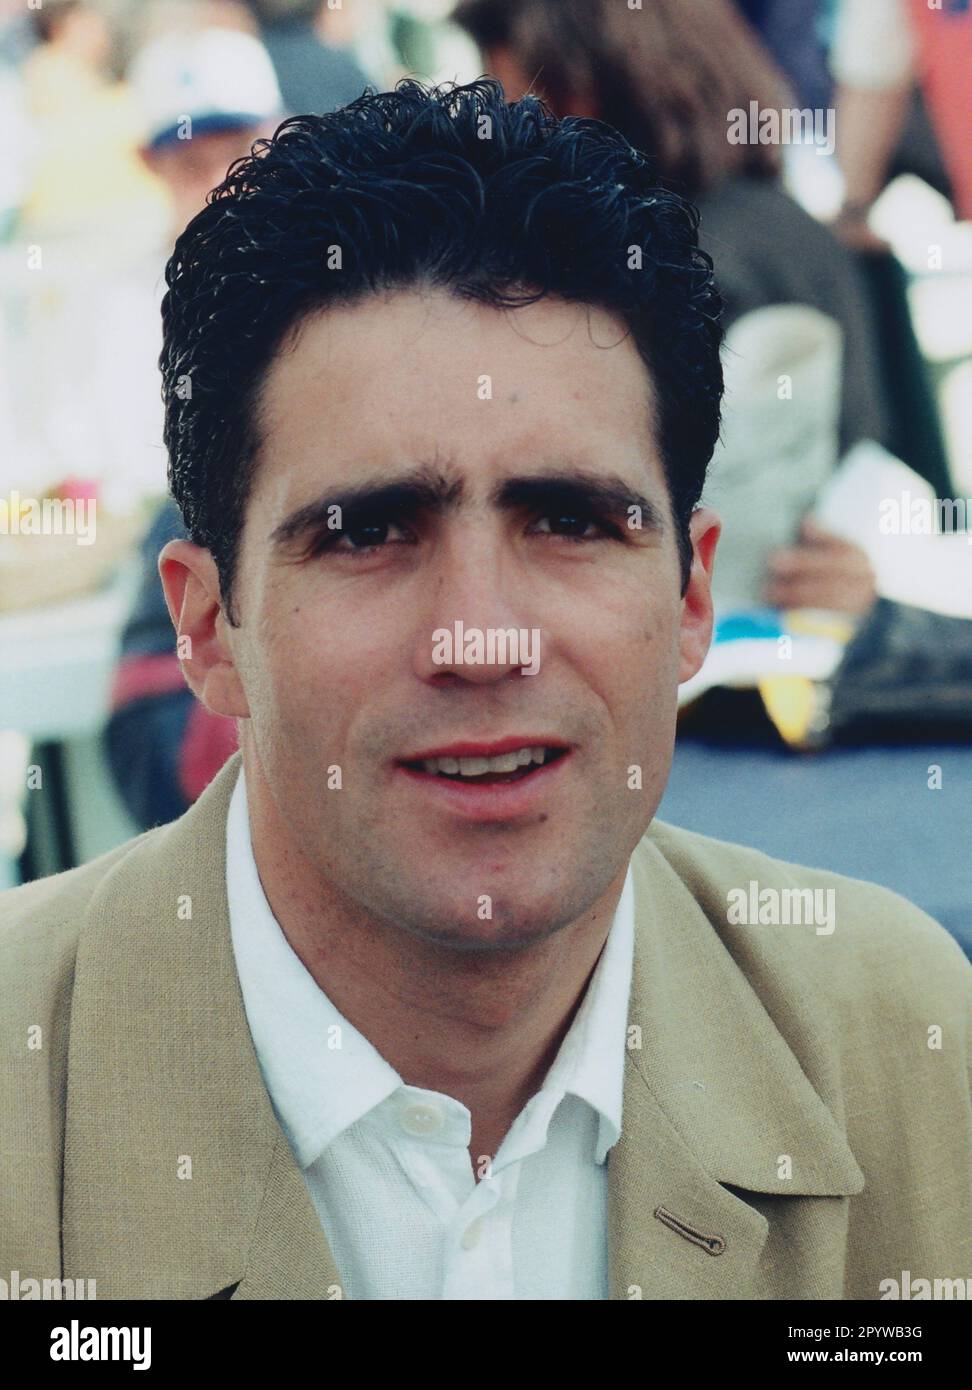 Miguel Indurain, guest of honor at the Tour de France, here in Rouen. [automated translation] Stock Photo